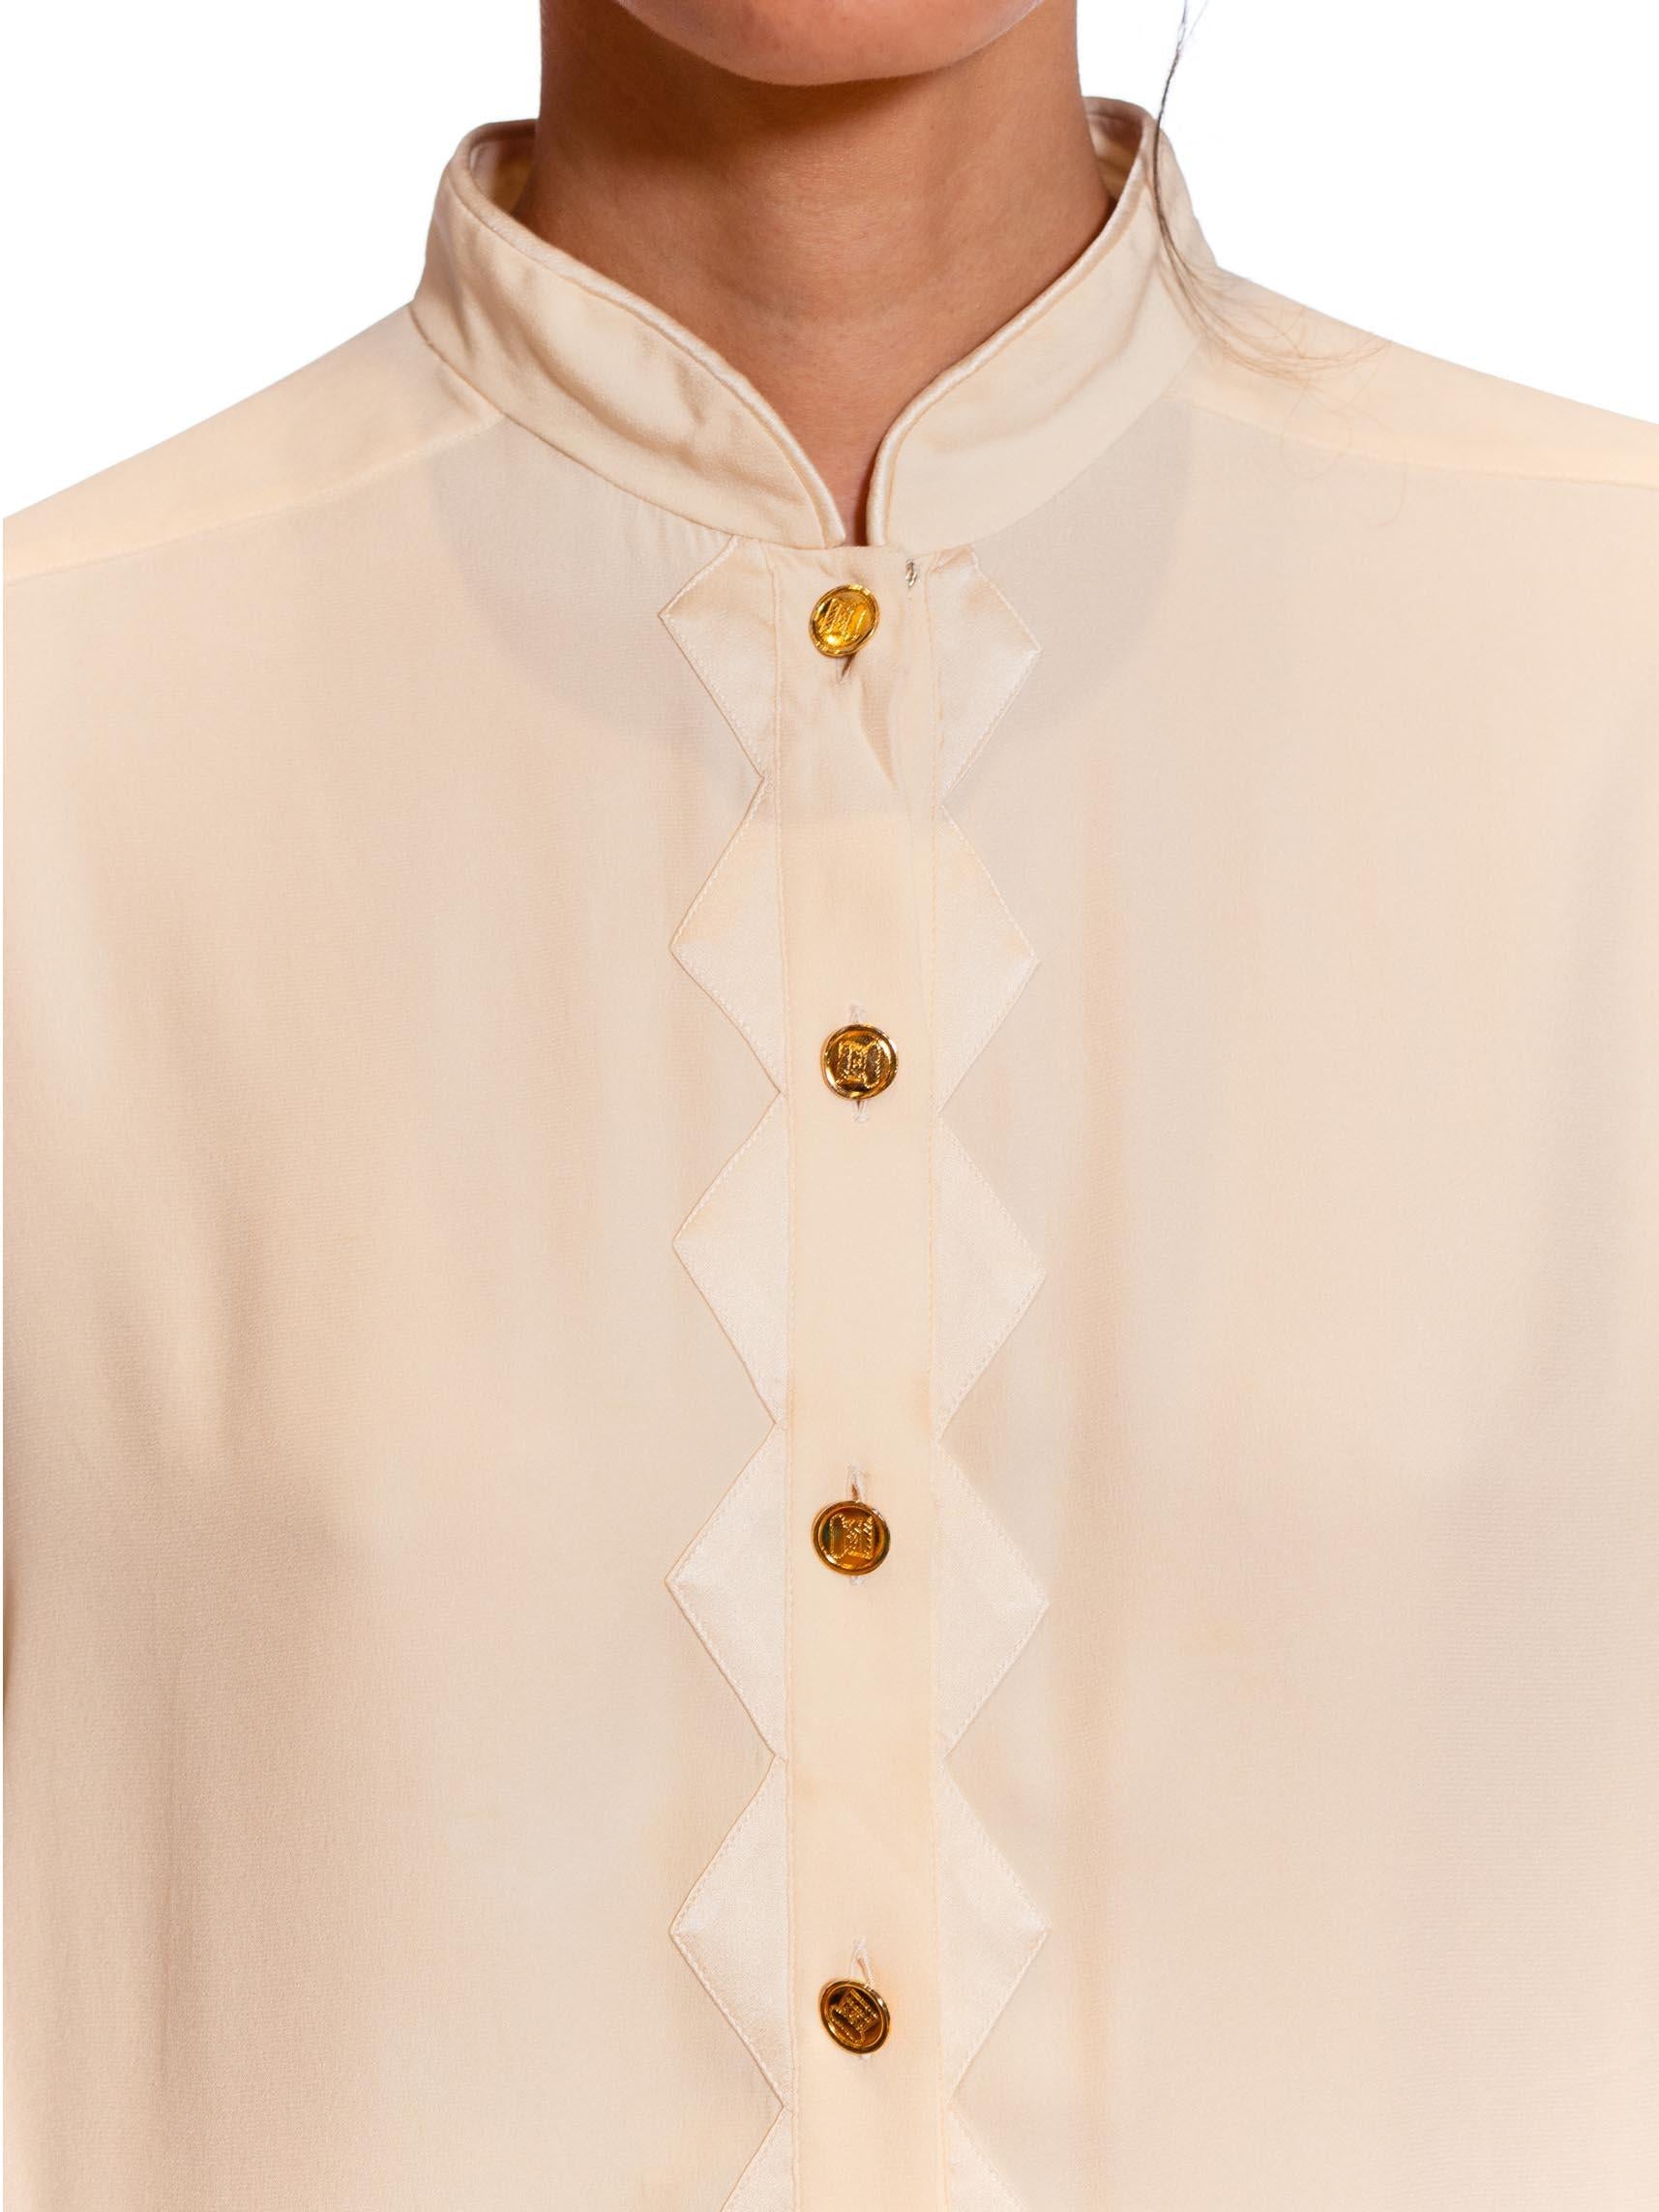 1980S CHANEL Ivory White Silk Crepe Blouse 5